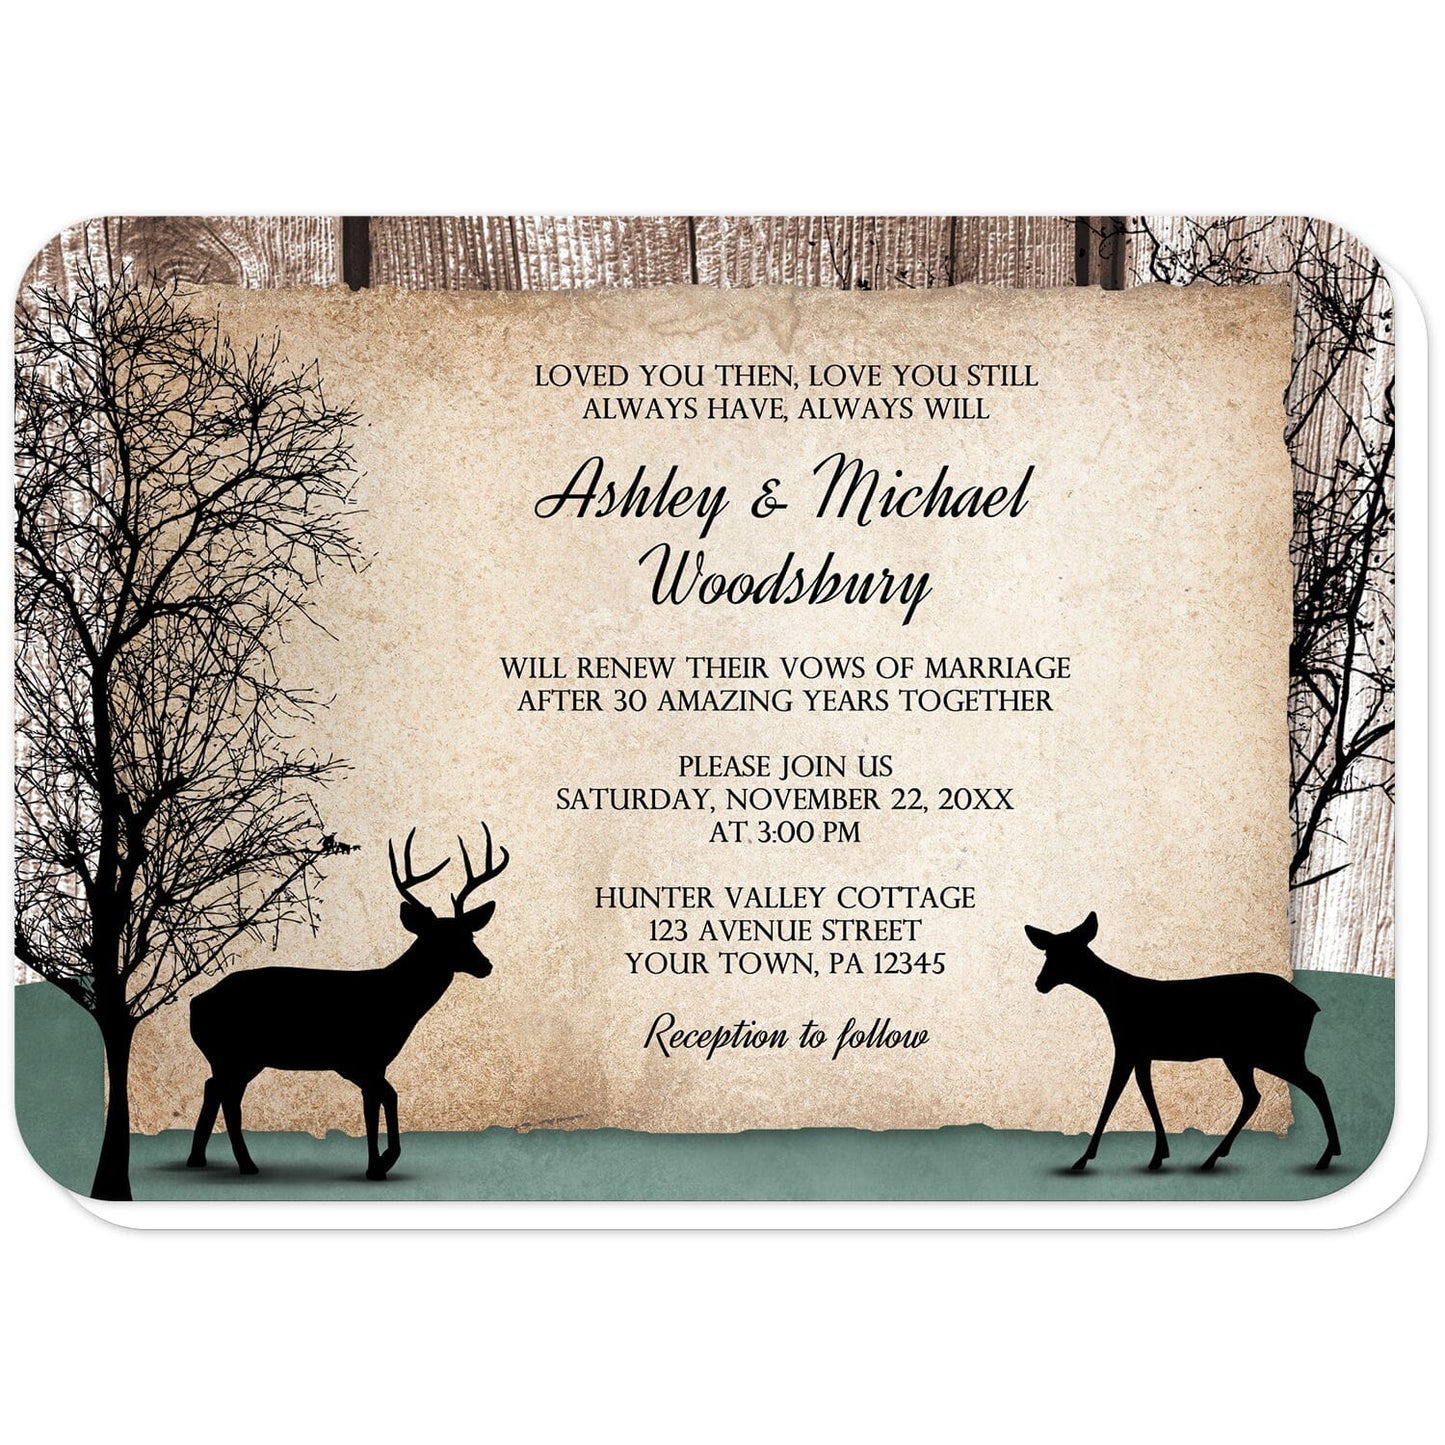 Rustic Woodsy Deer Vow Renewal Invitations (with rounded corners) at Artistically Invited. Rustic woodsy deer vow renewal invitations designed with silhouettes of a buck deer with antlers, a doe, and winter trees over a wood brown background and a faded hunter green design along the bottom. Your personalized vow renewal celebration details are custom printed in black over a tattered rustic paper illustration between the deer.